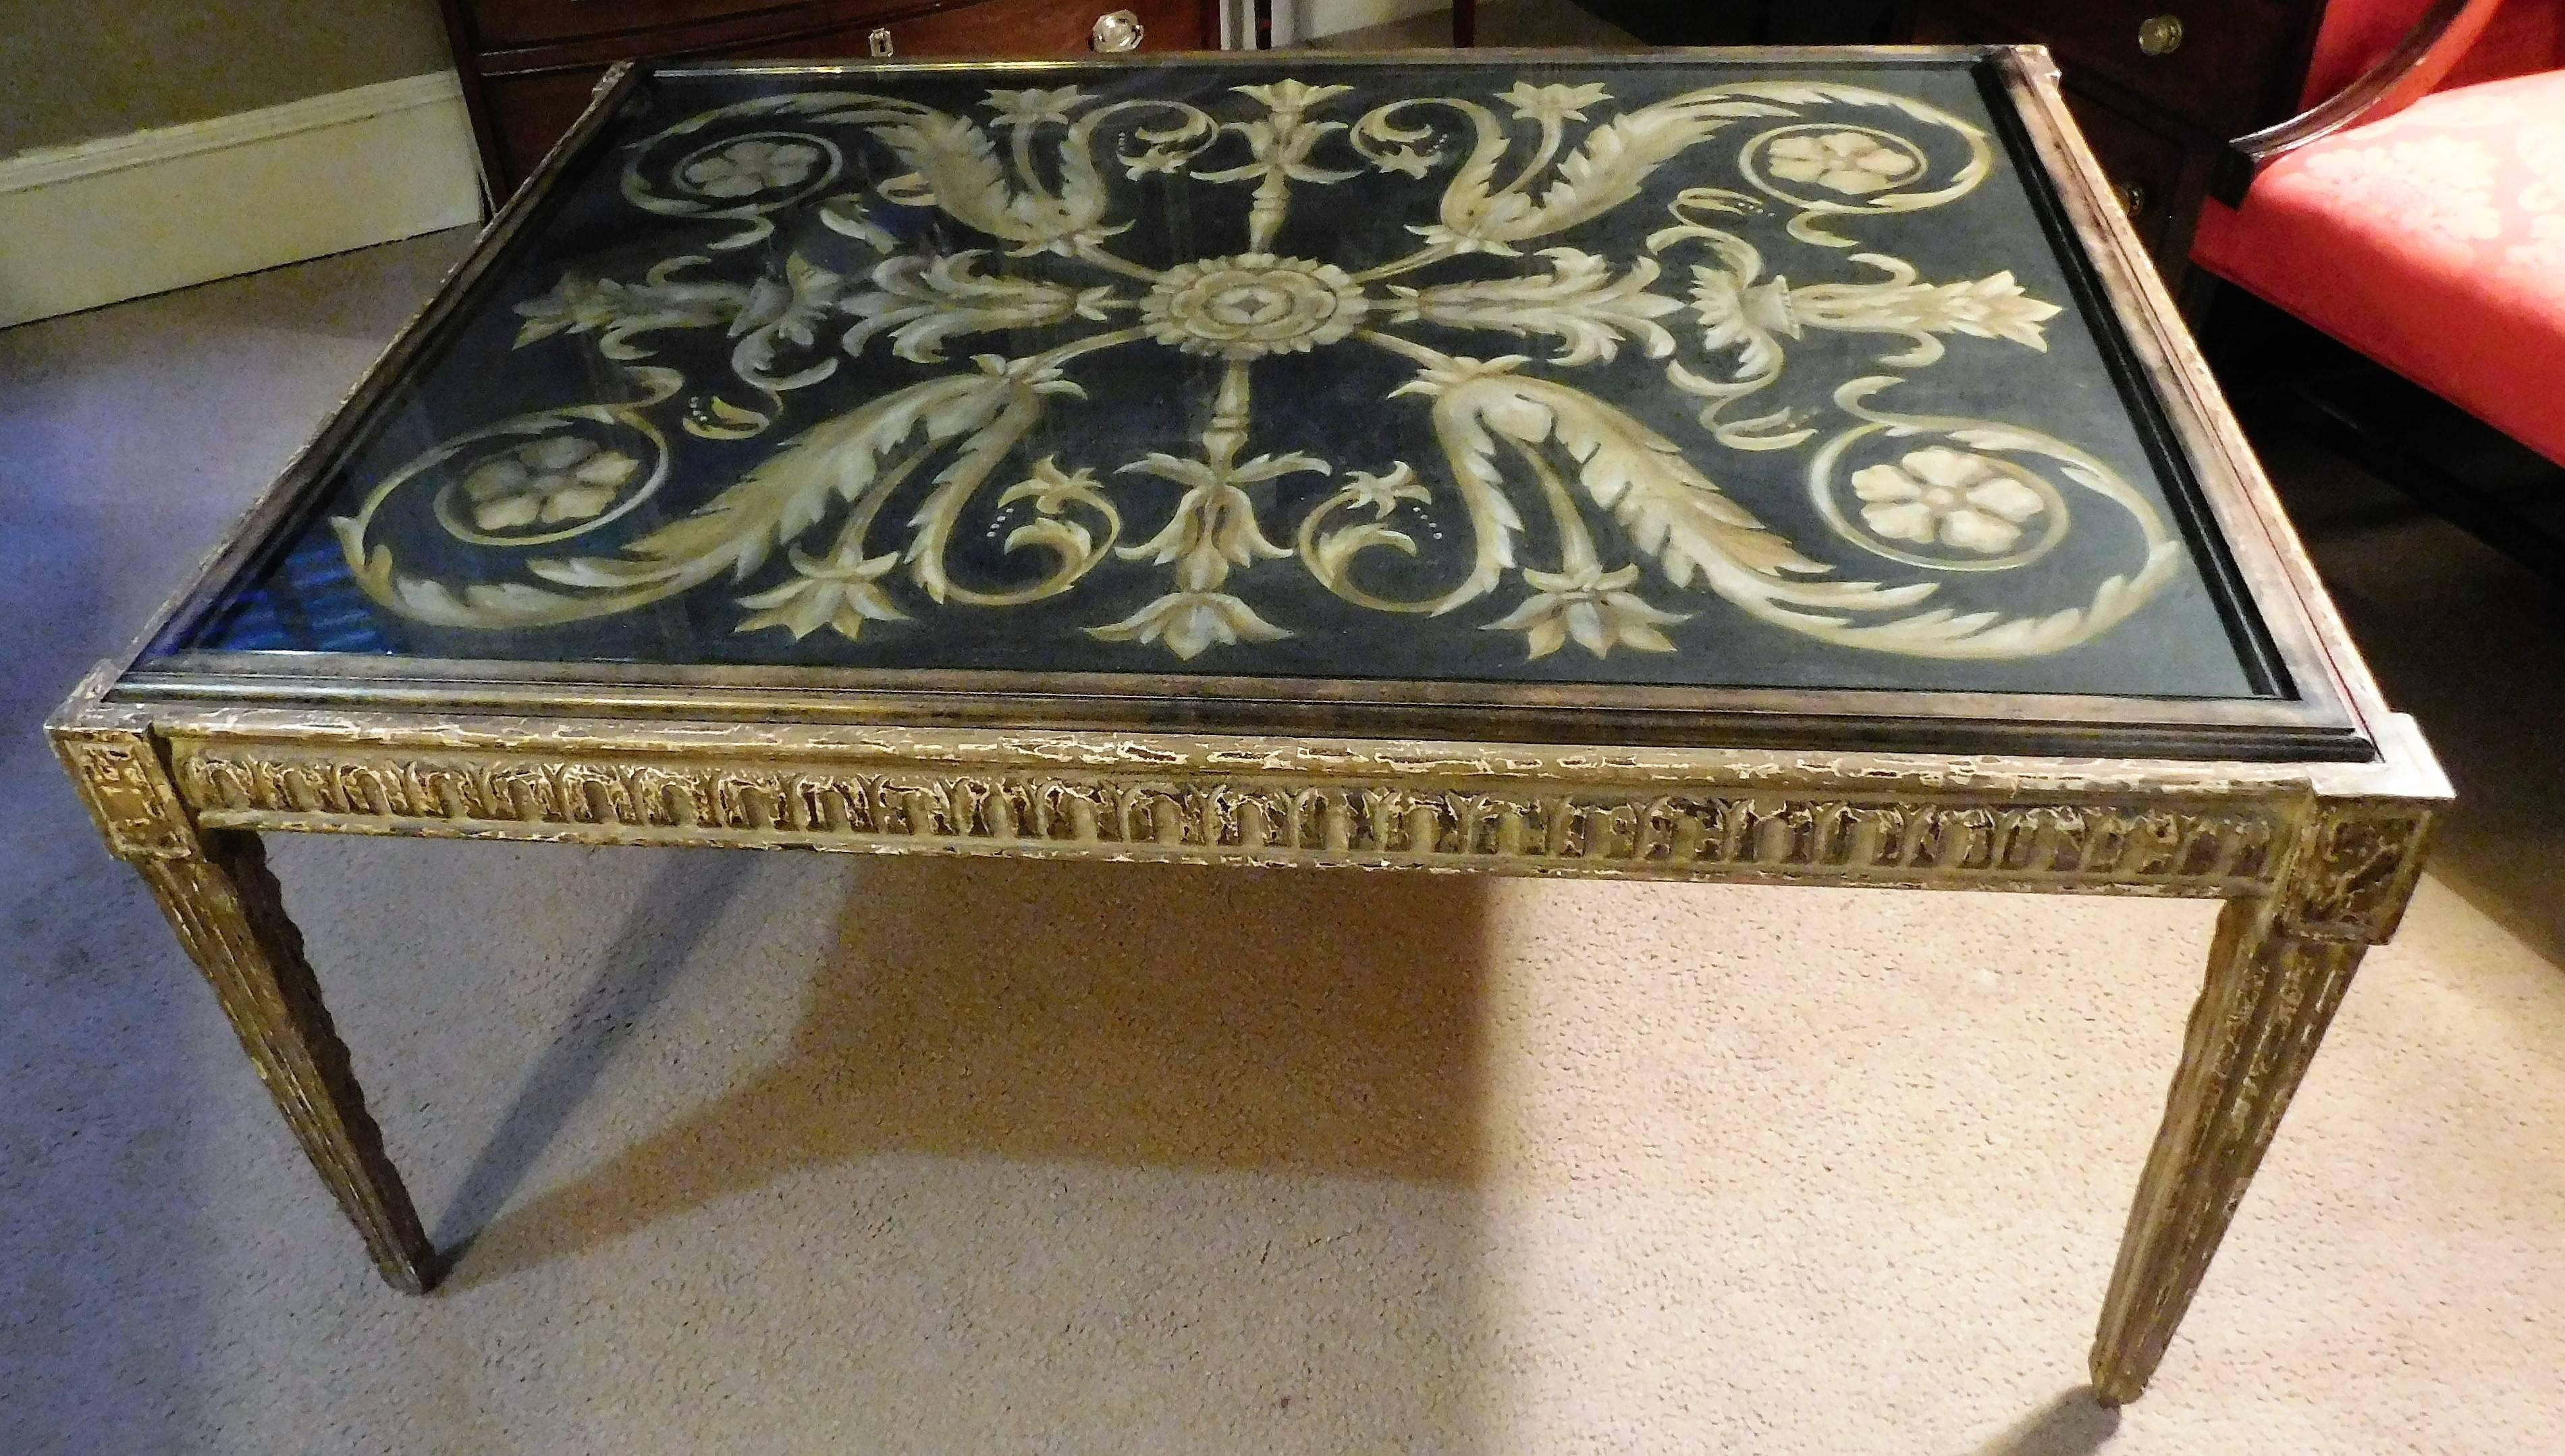 A large bench-made carved and painted wooden coffee table with canvas painted top. Bold Baroque design in muted colors under glass. Faux aged legs and skirt. Signed 